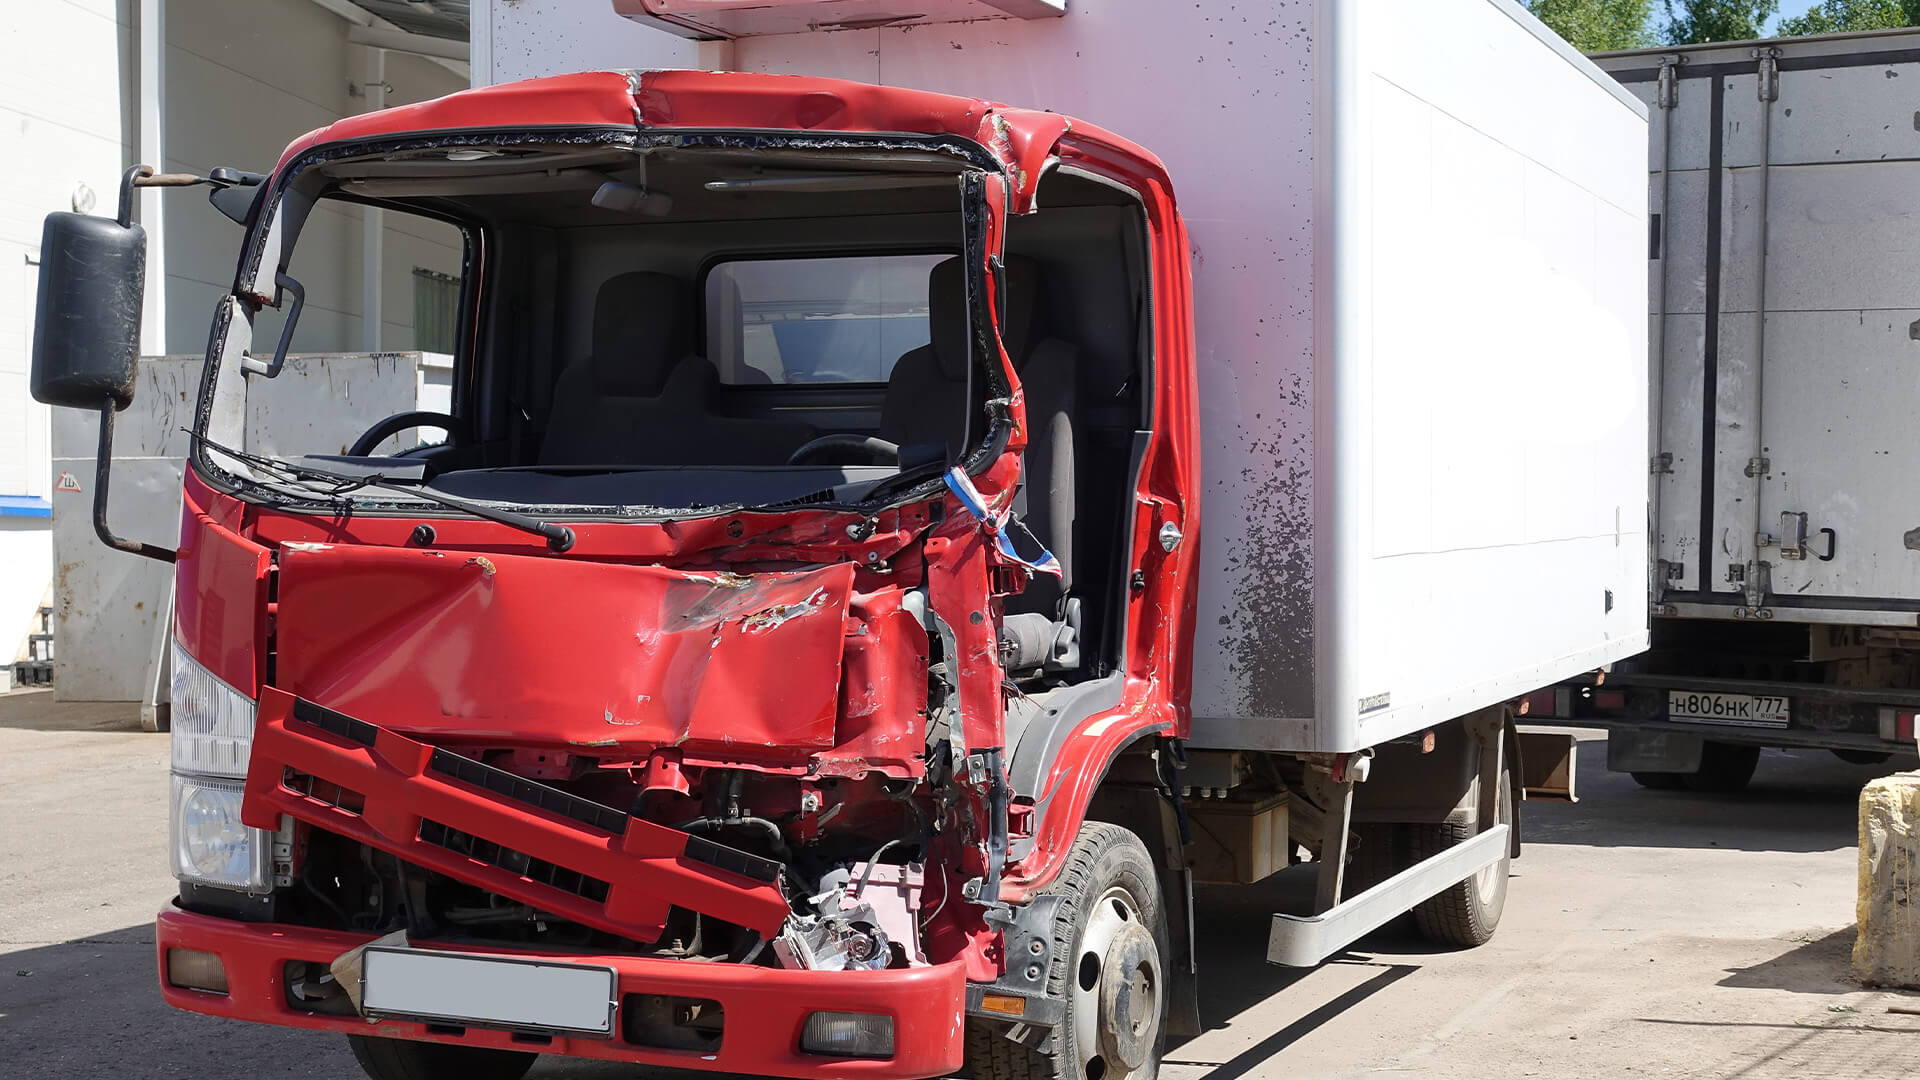 HGV recently in an accident, with the front badly damaged